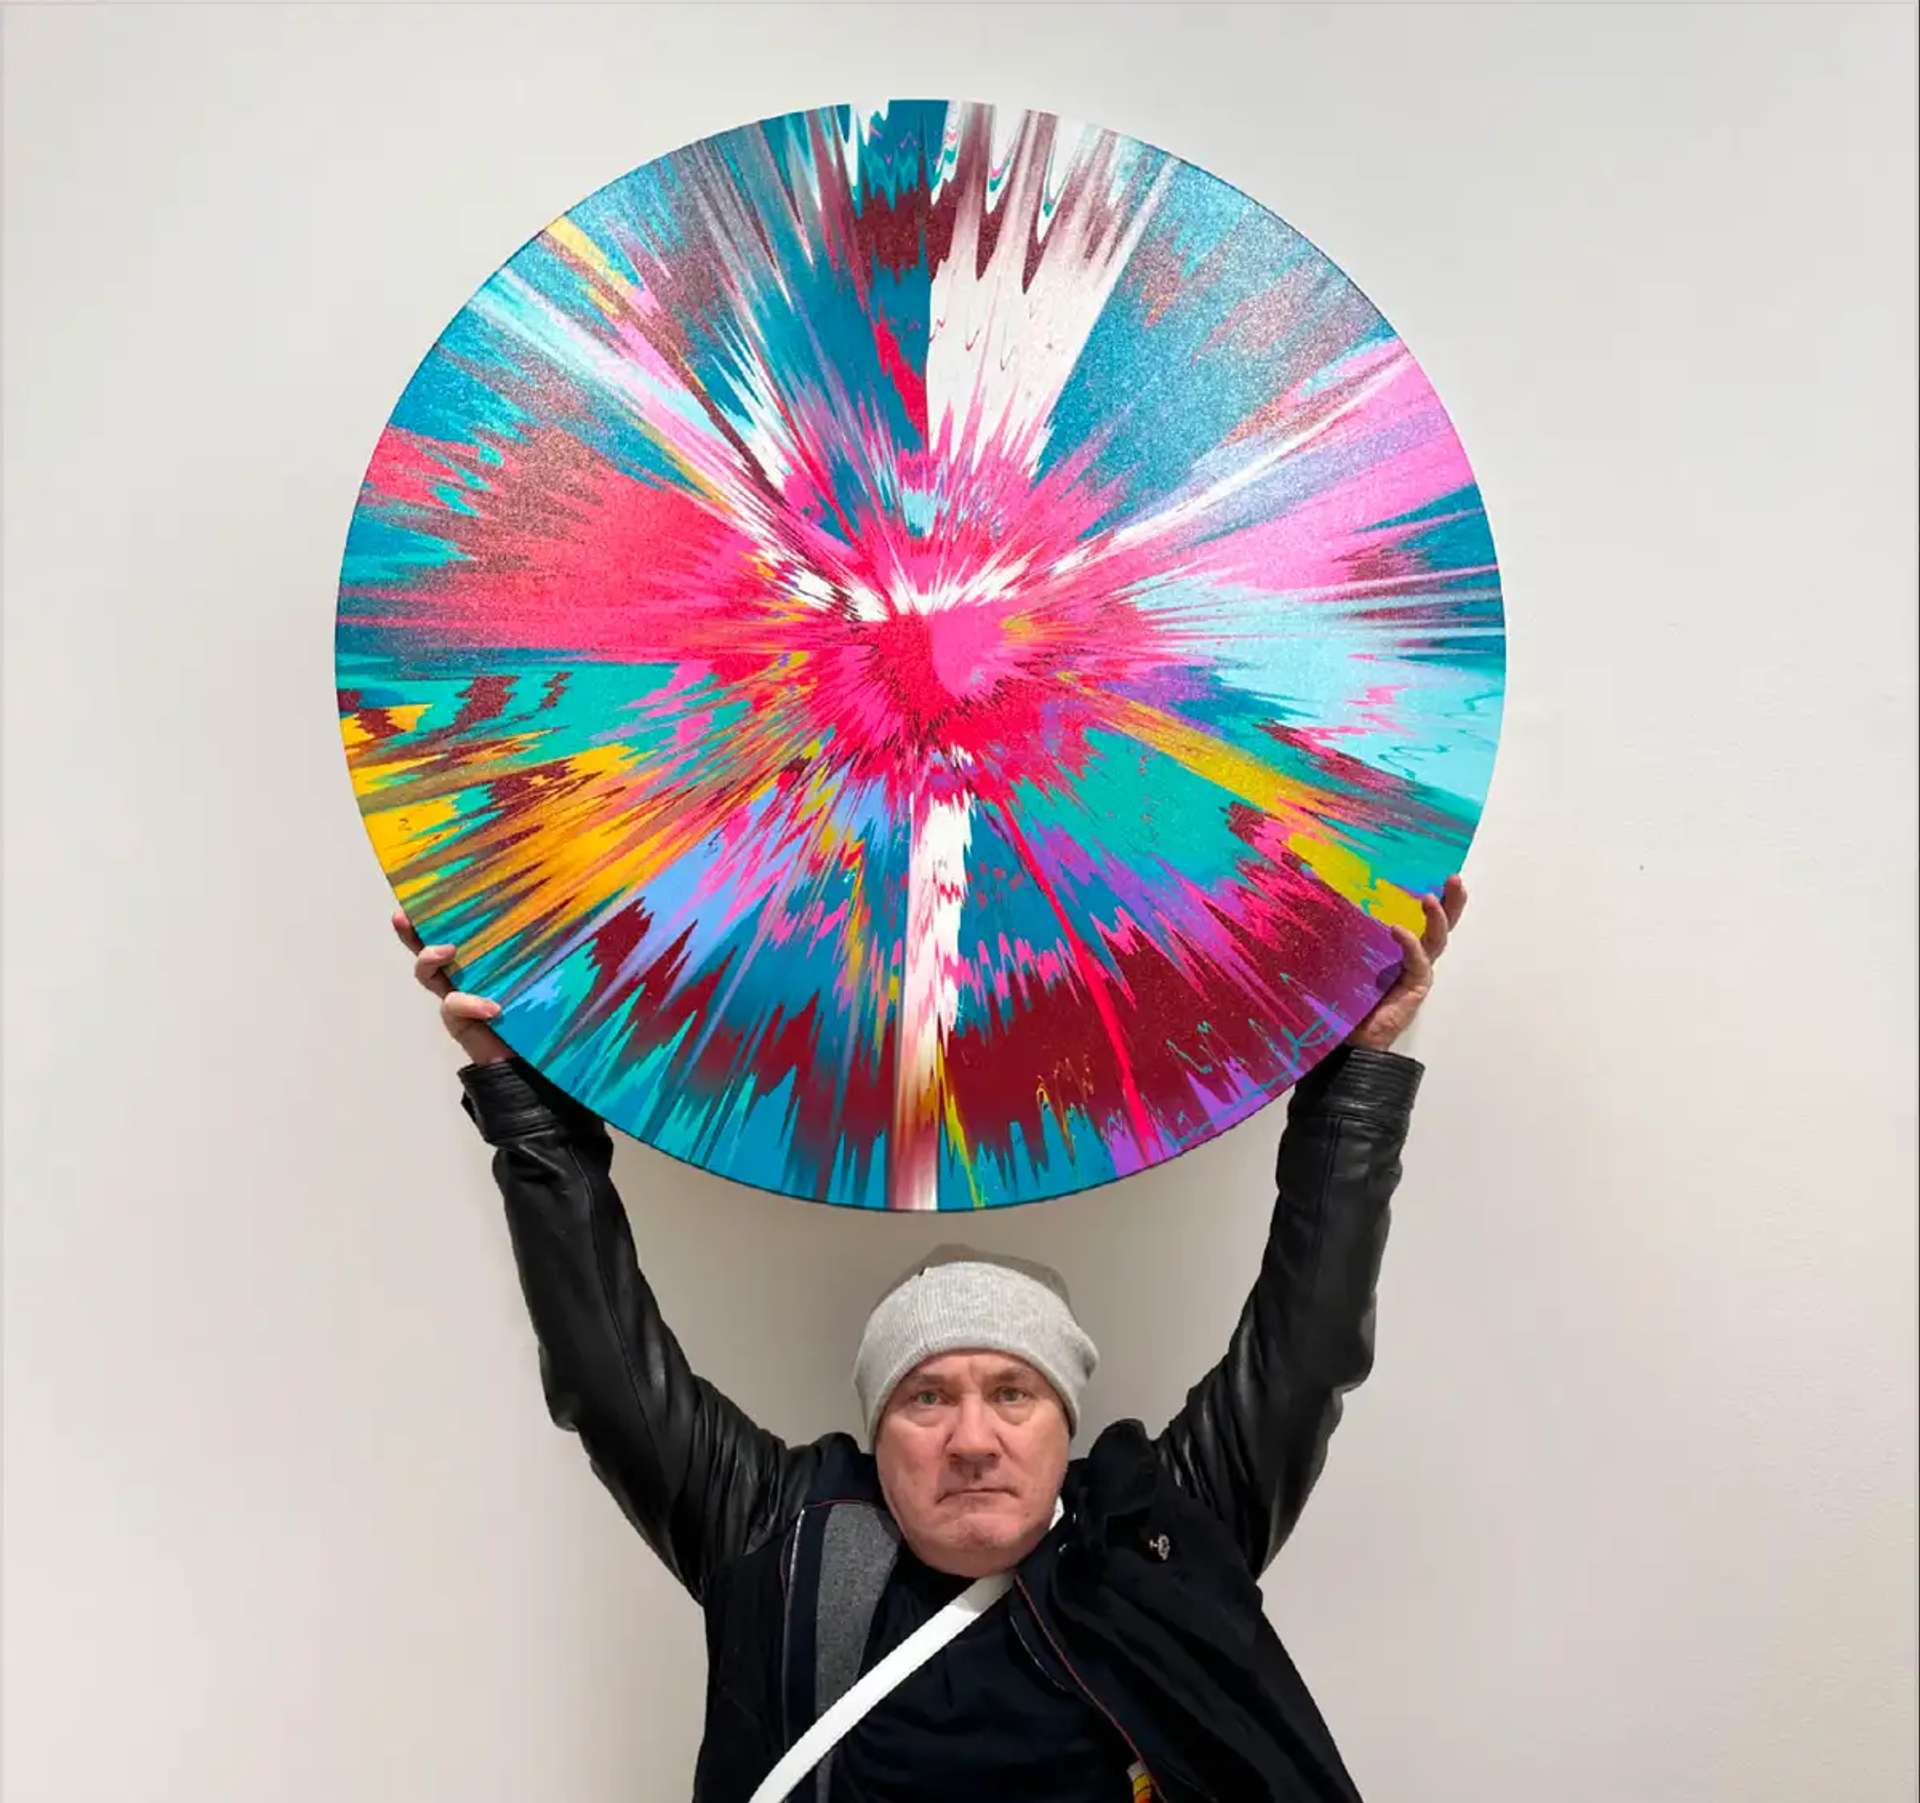 Photograph of Damien Hirst holding one of his circular Beautiful Paintings made in collaboration with HENI